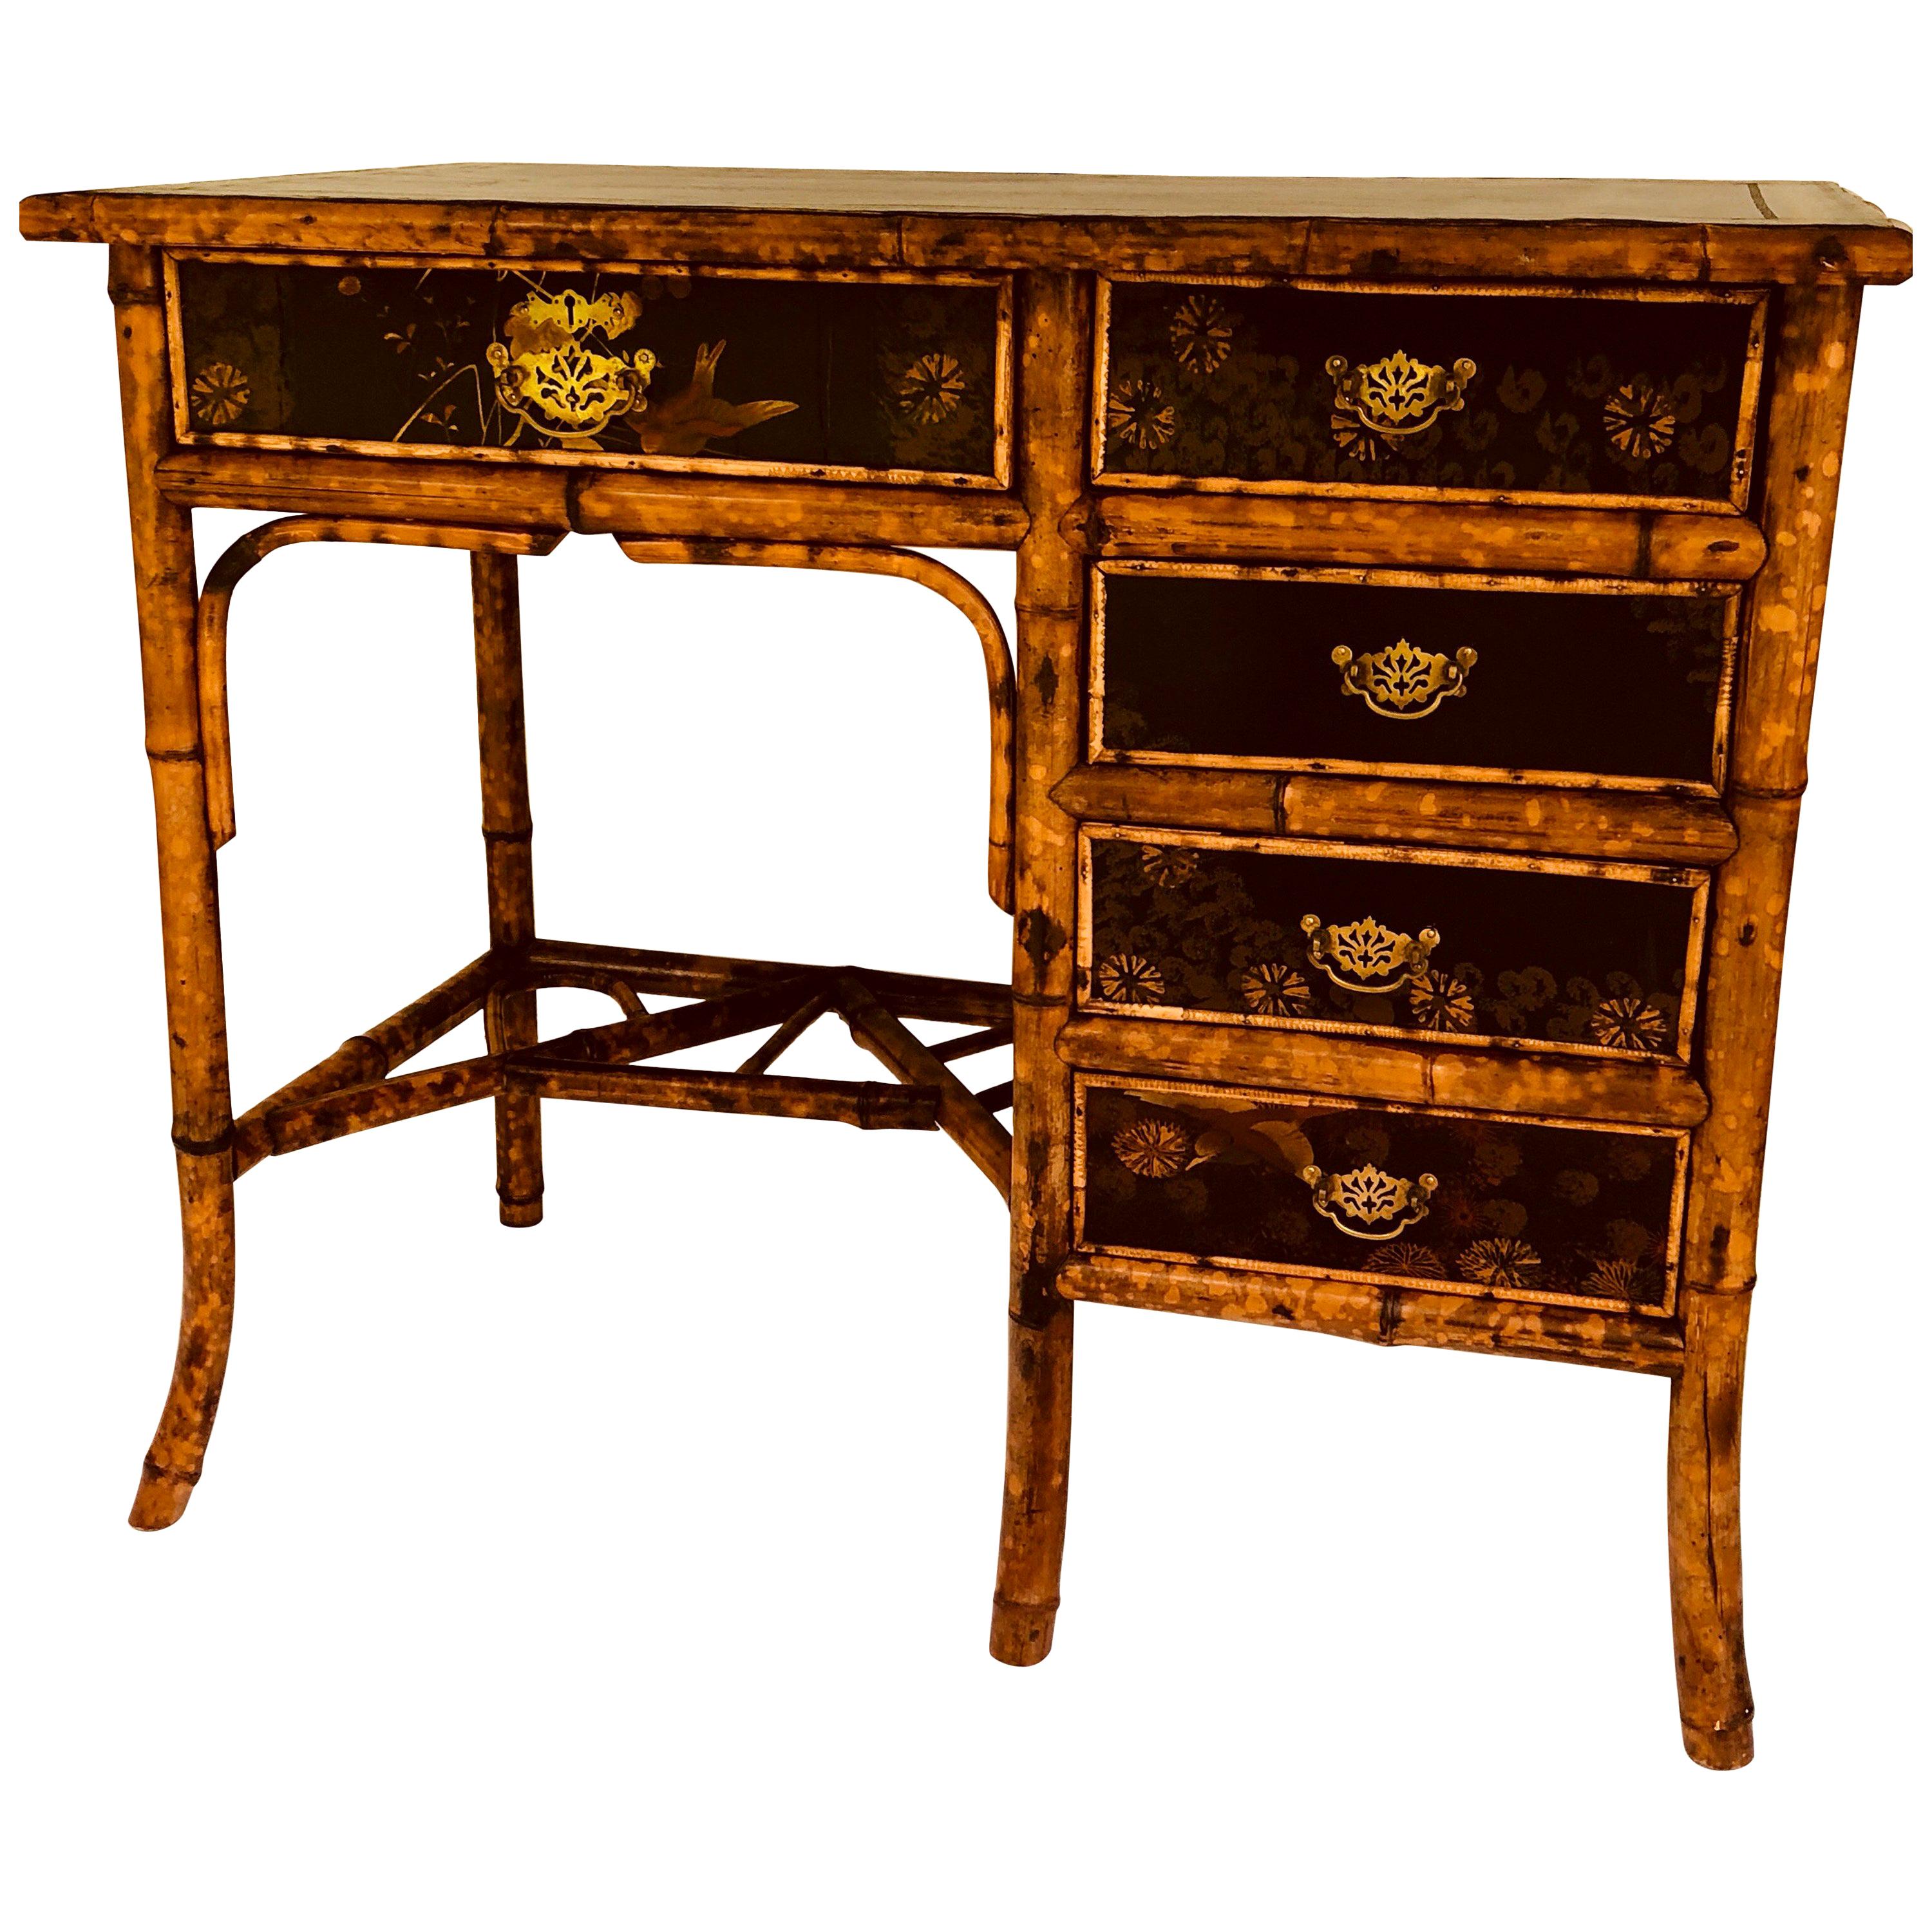 Brass-Mounted Bamboo and Lacquer Decorated Desk For Sale